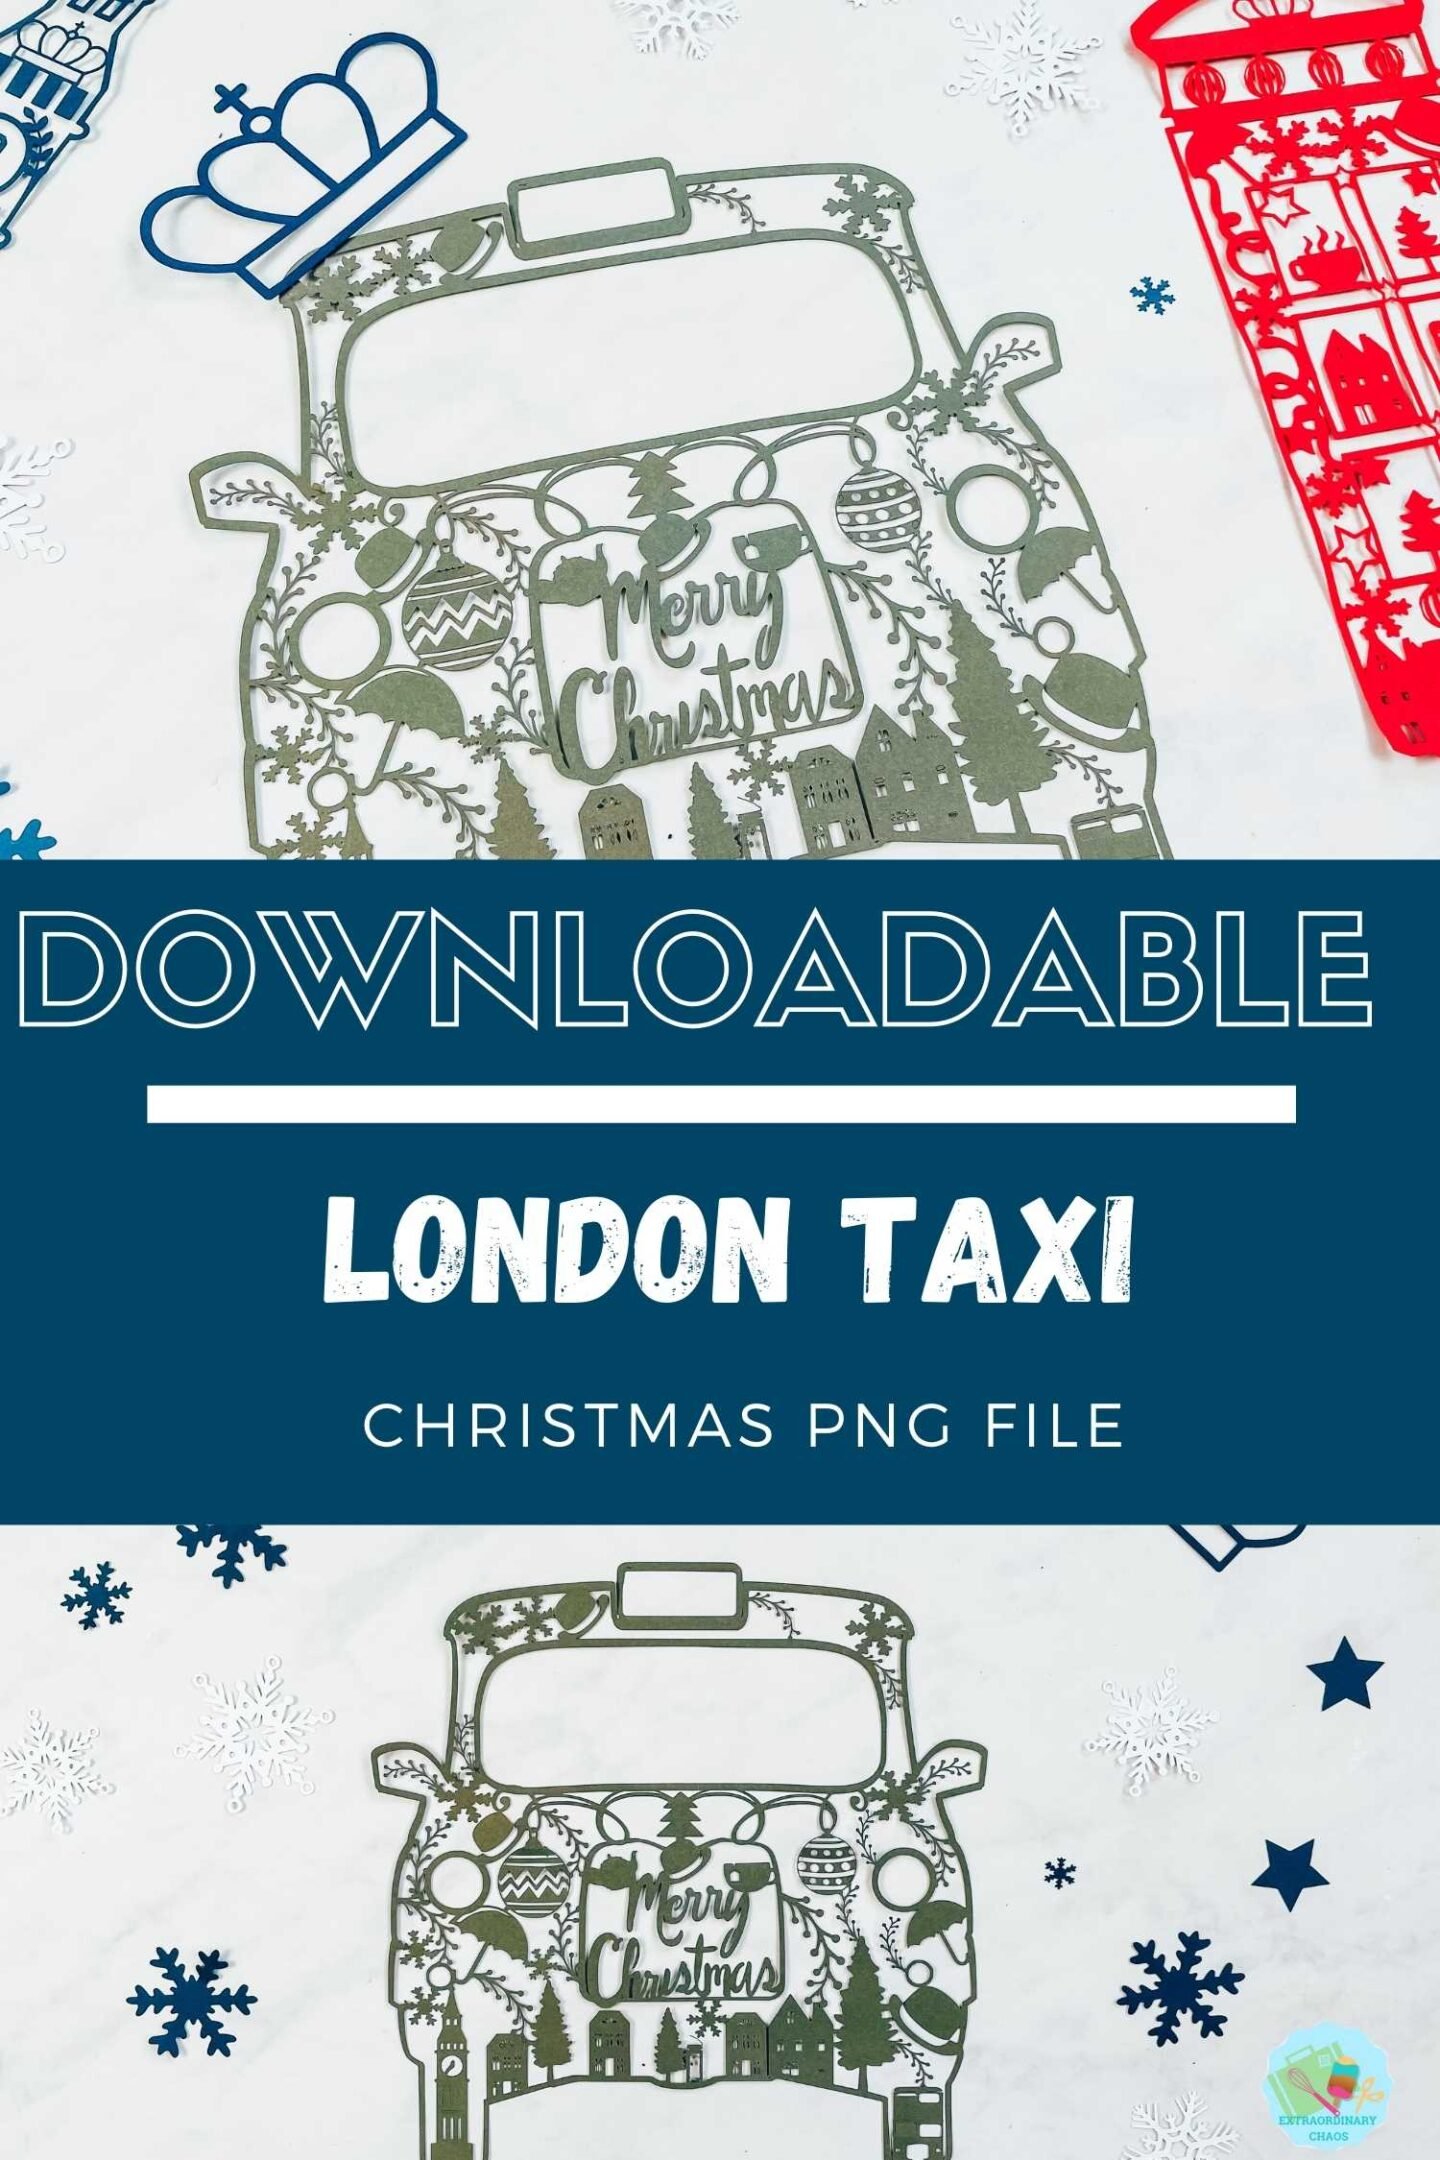 Downloadable Christmas London Taxi PNG file for Cricut Crafts for Christmas Craft projects